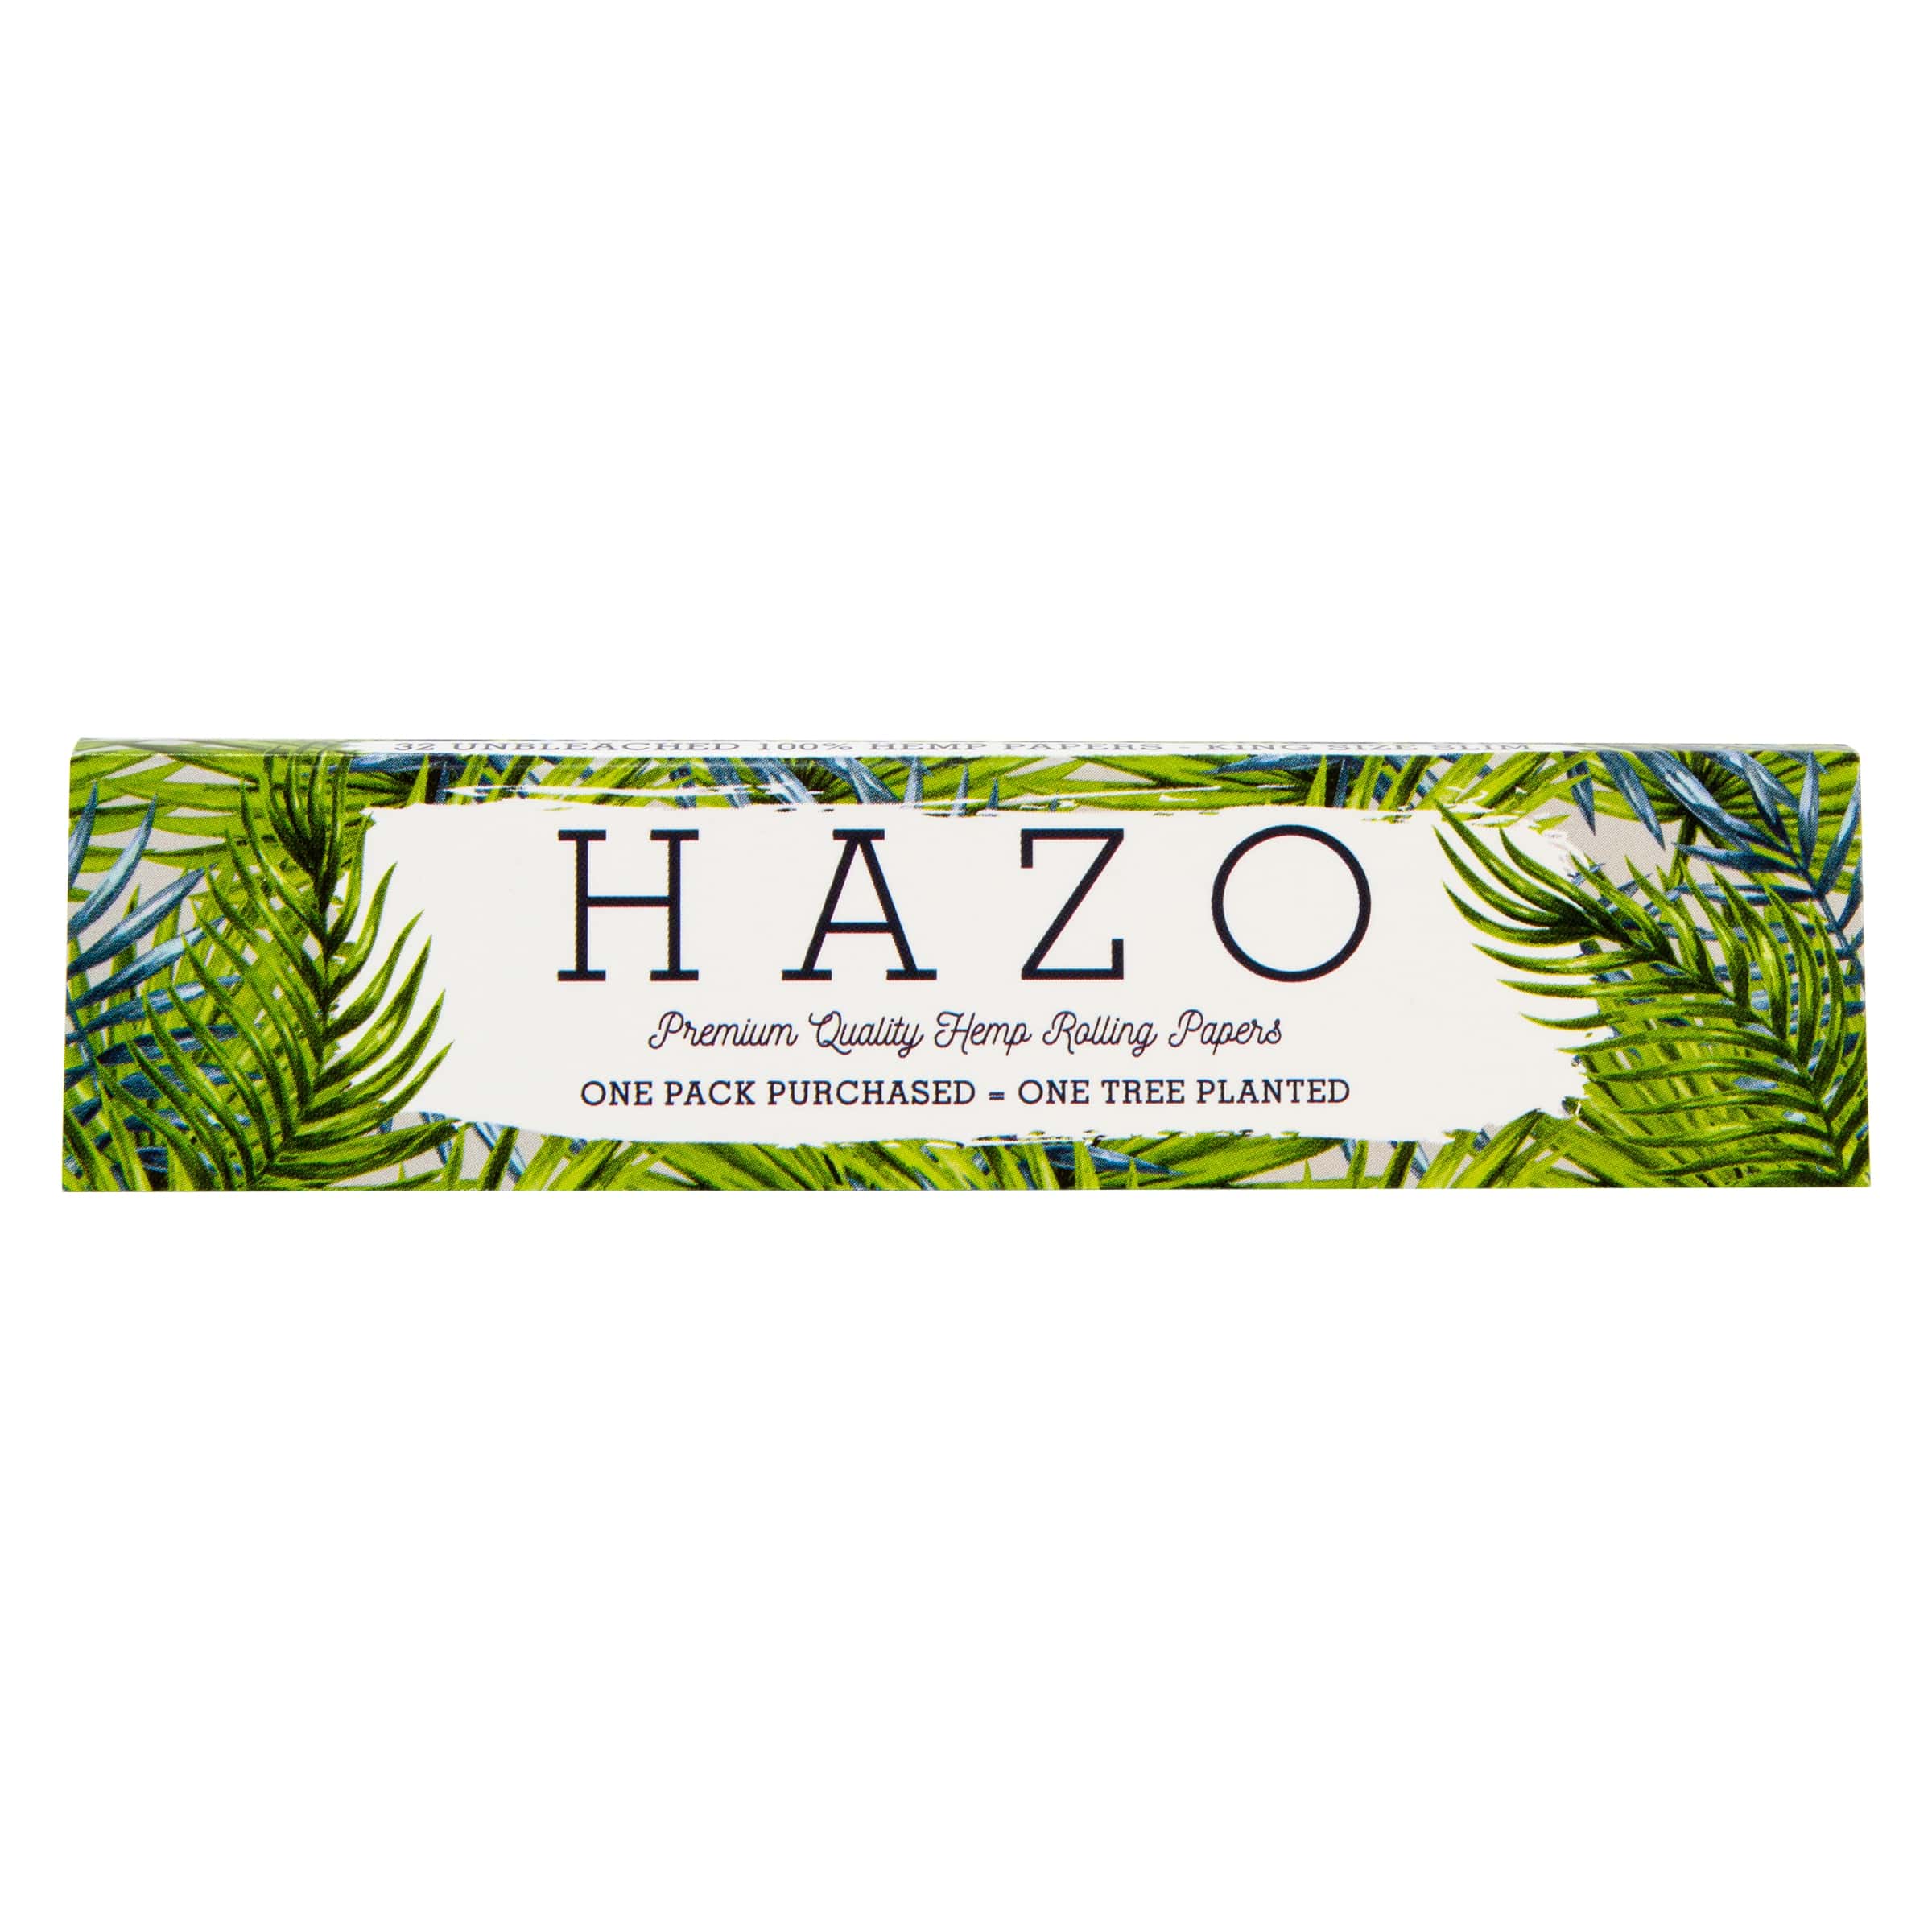 HAZO King Size Slim Unbleached Hemp Rolling Papers